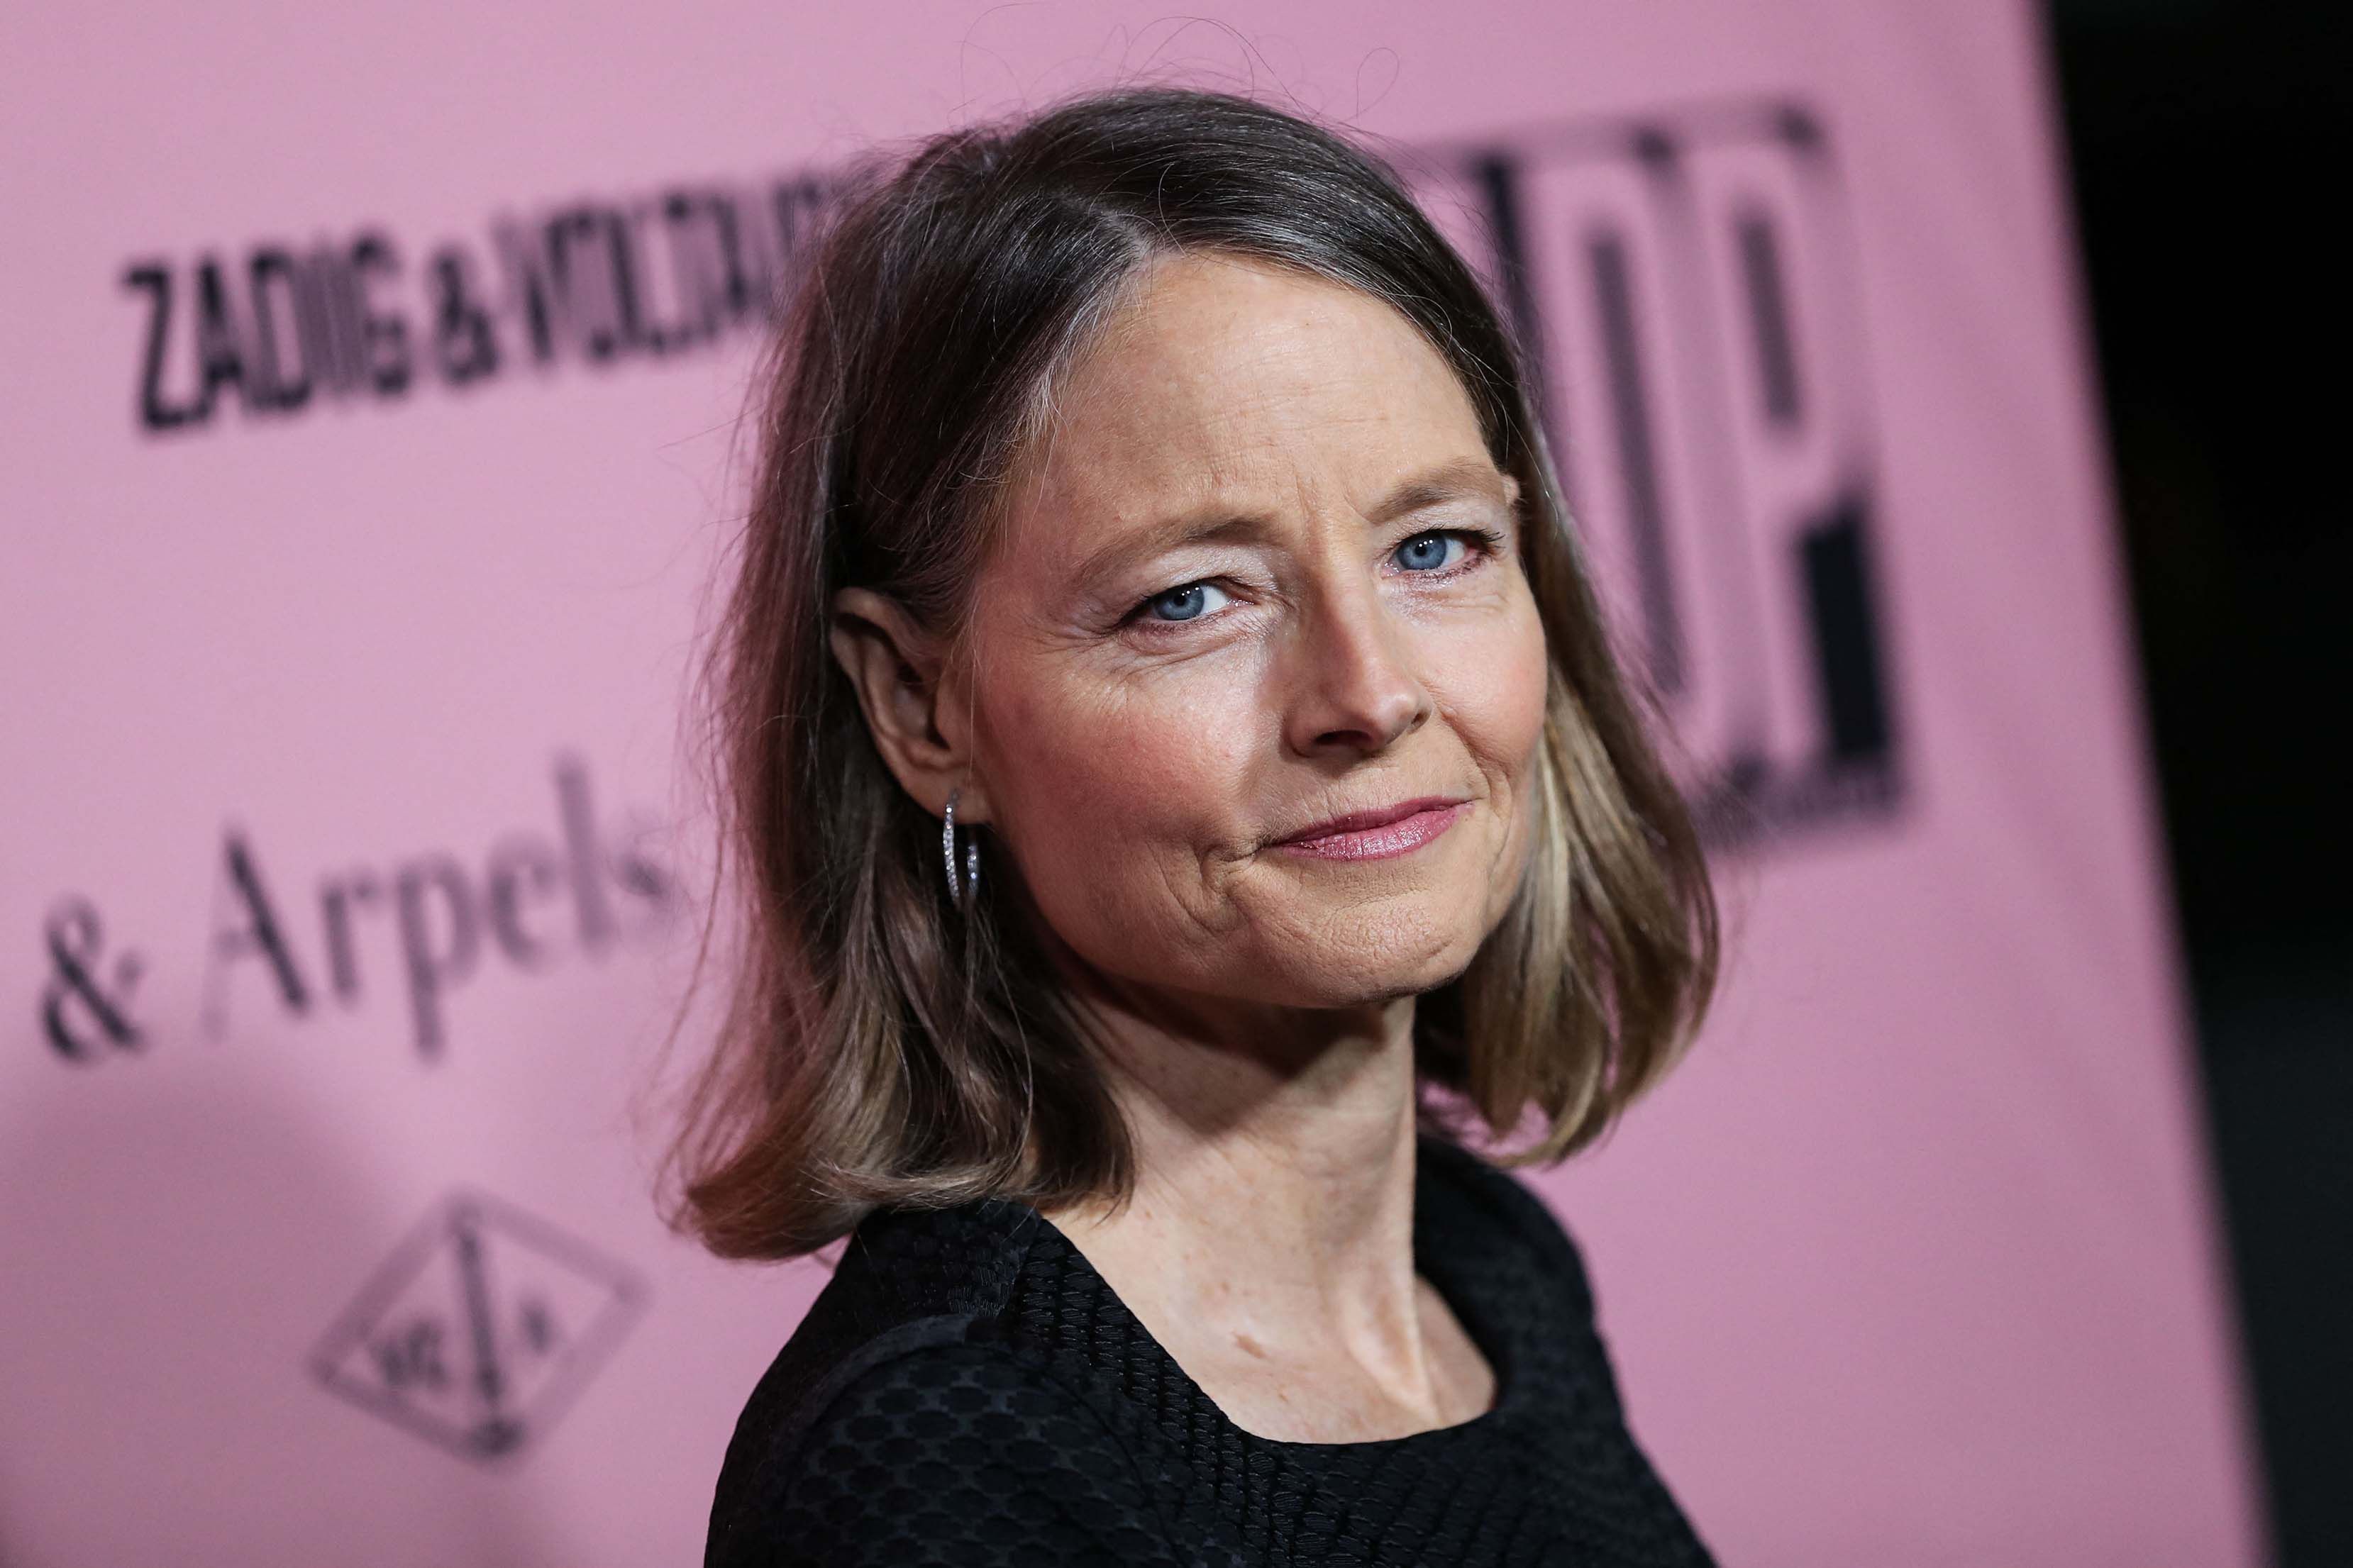 Michael Douglas Request To Have Jodie Foster As His Sister Instead Of